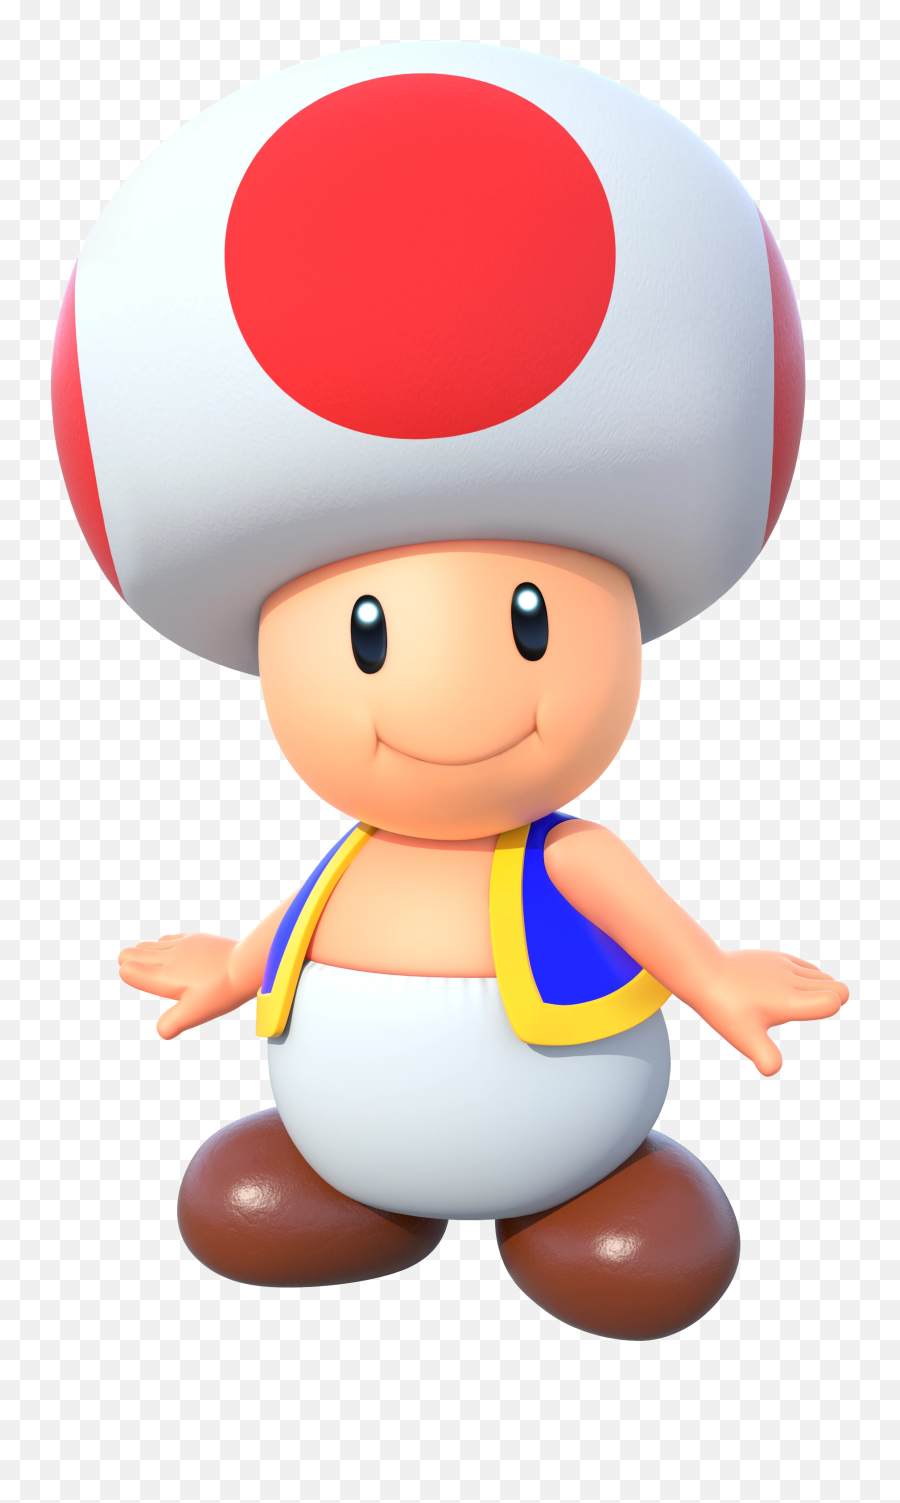 Whats Your First Impression Of Me - Toad Mario Kart Emoji,Pervy Face Emoji